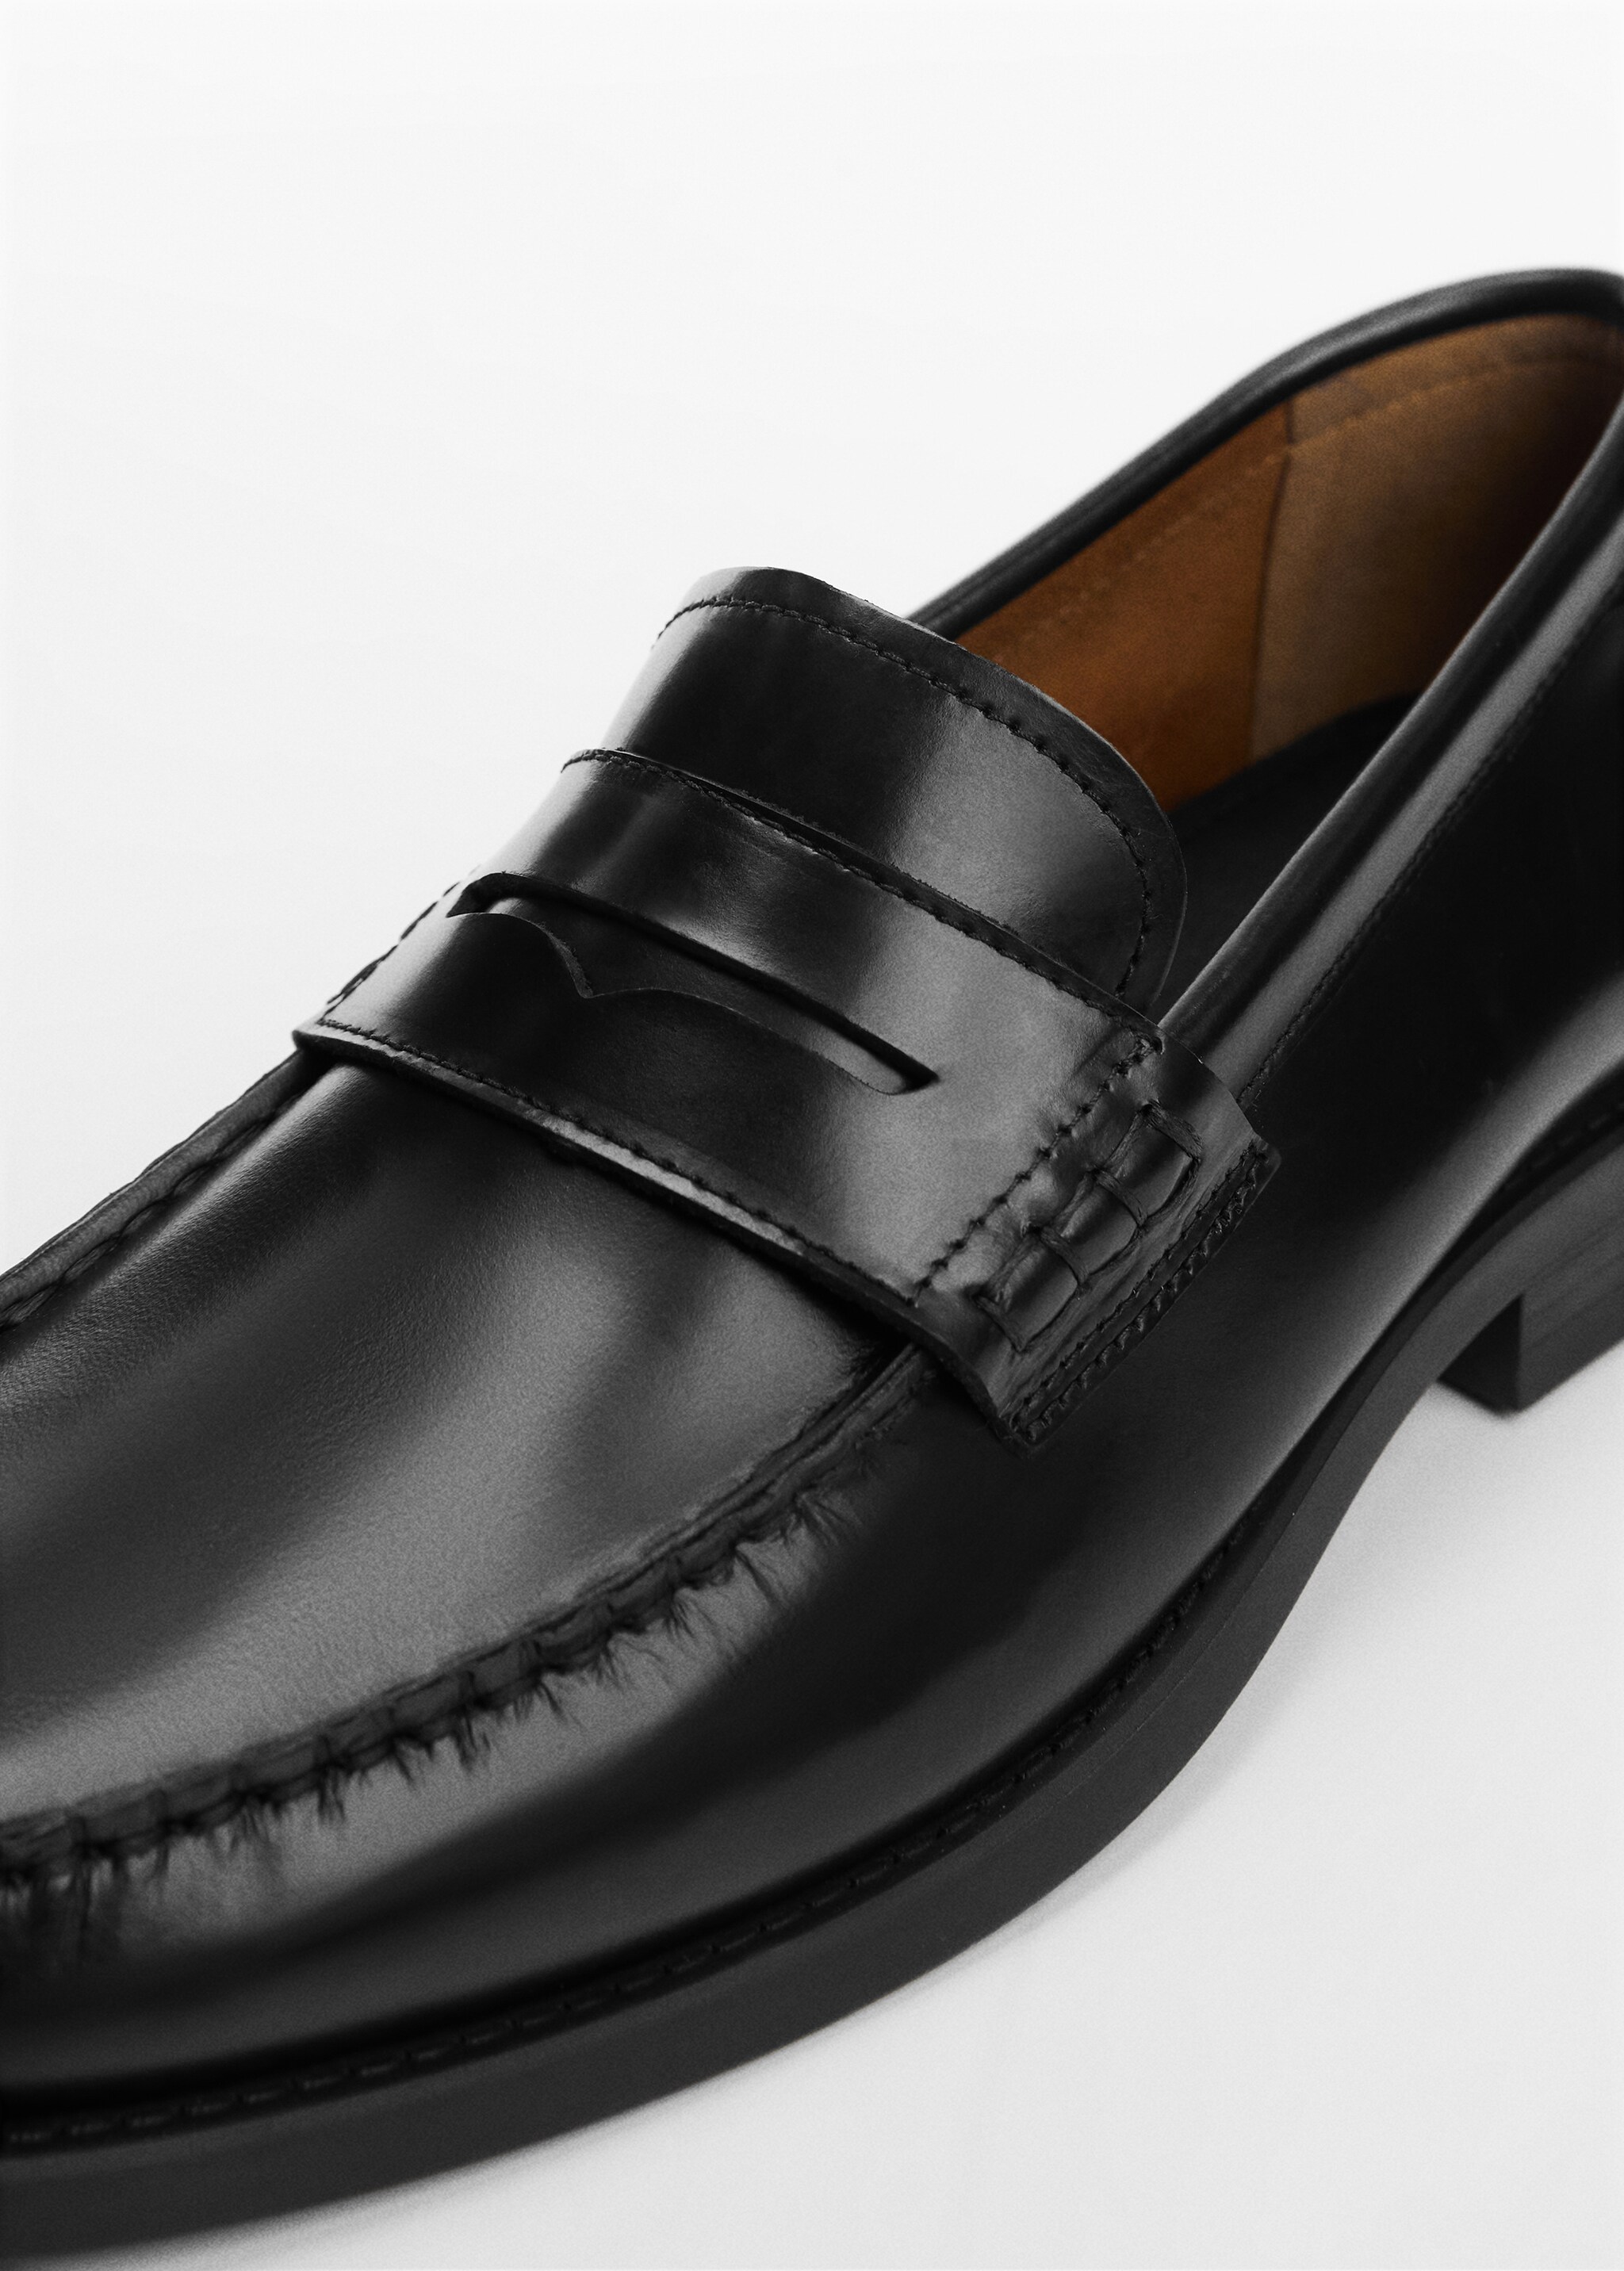 Aged-leather loafers - Details of the article 2